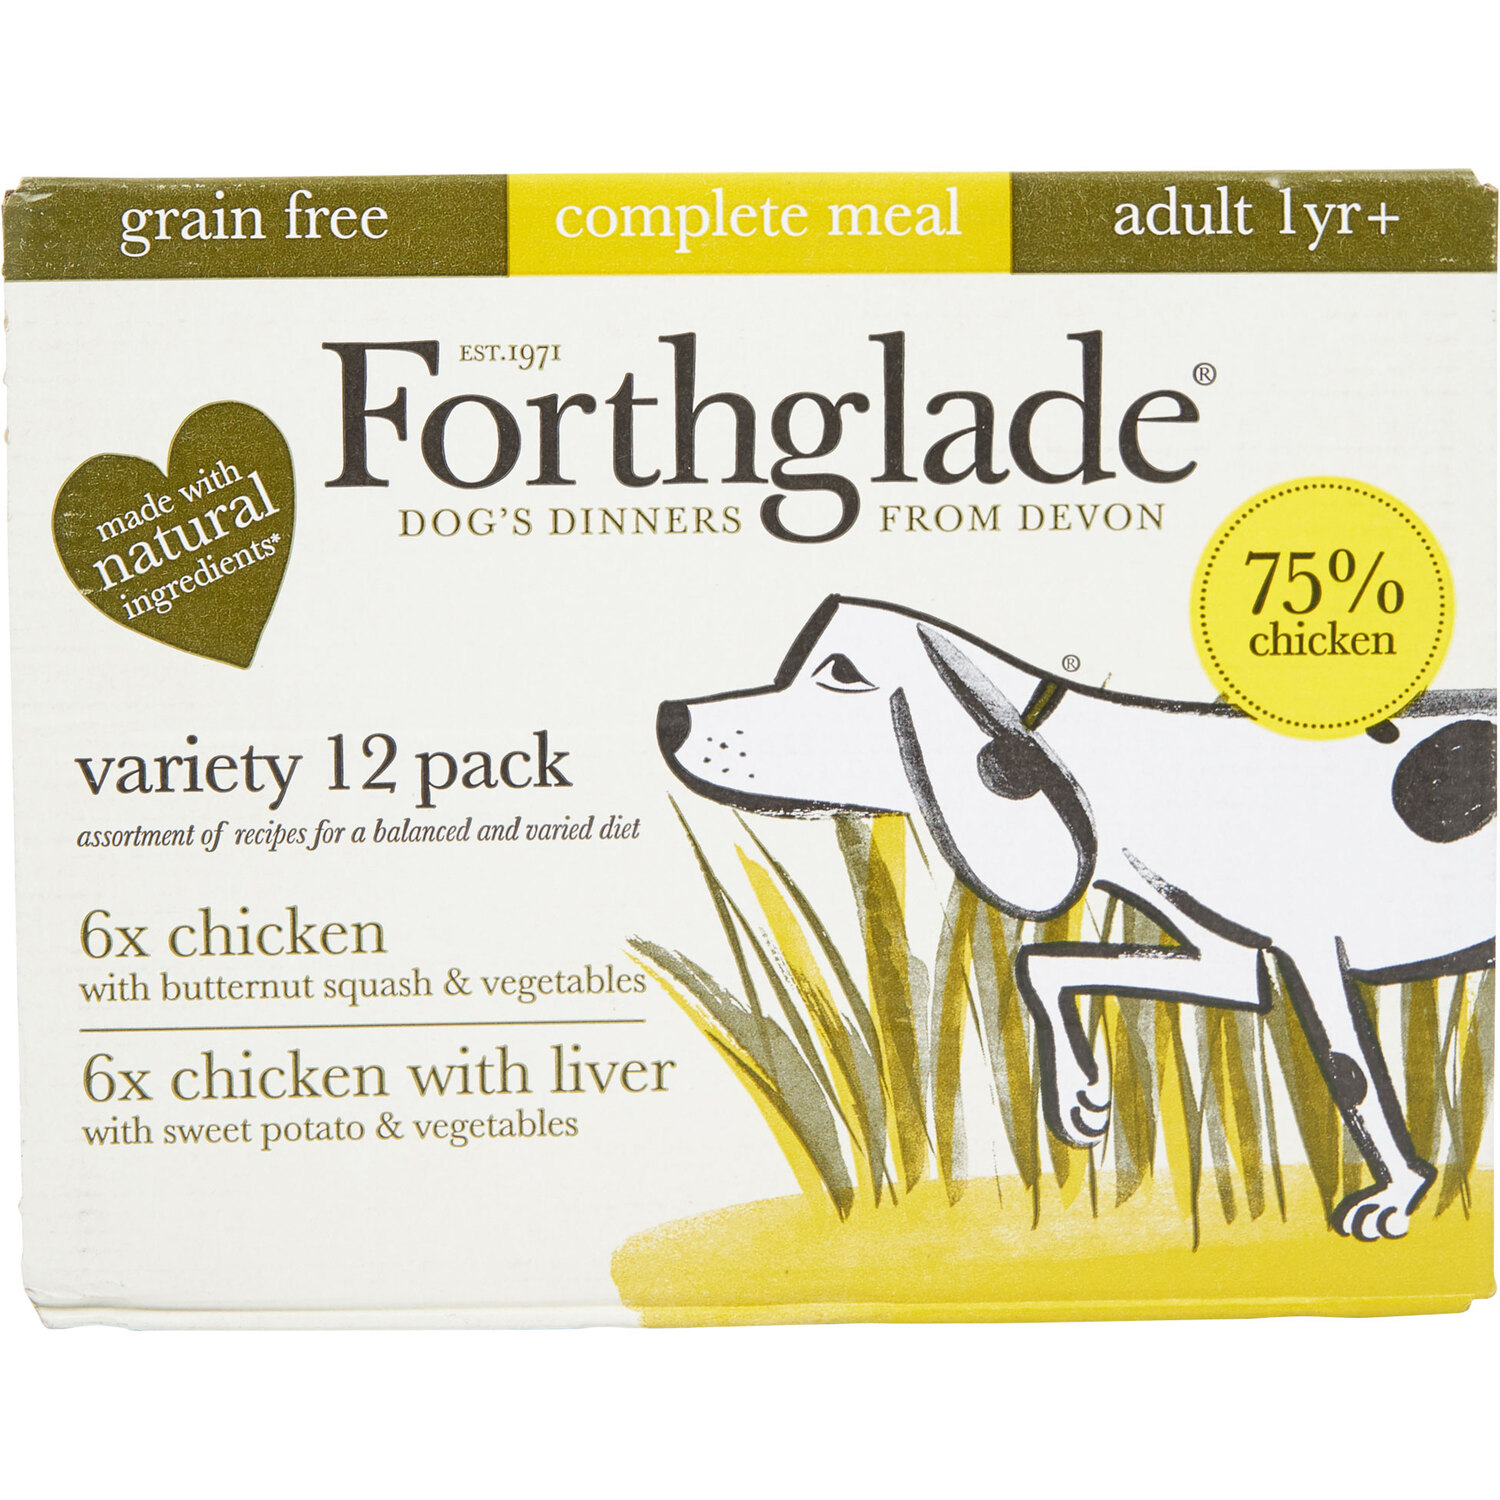 Forthglade Wet Dog Food Trays - 6 x Chicken / 6 x Chicken with Liver Image 1